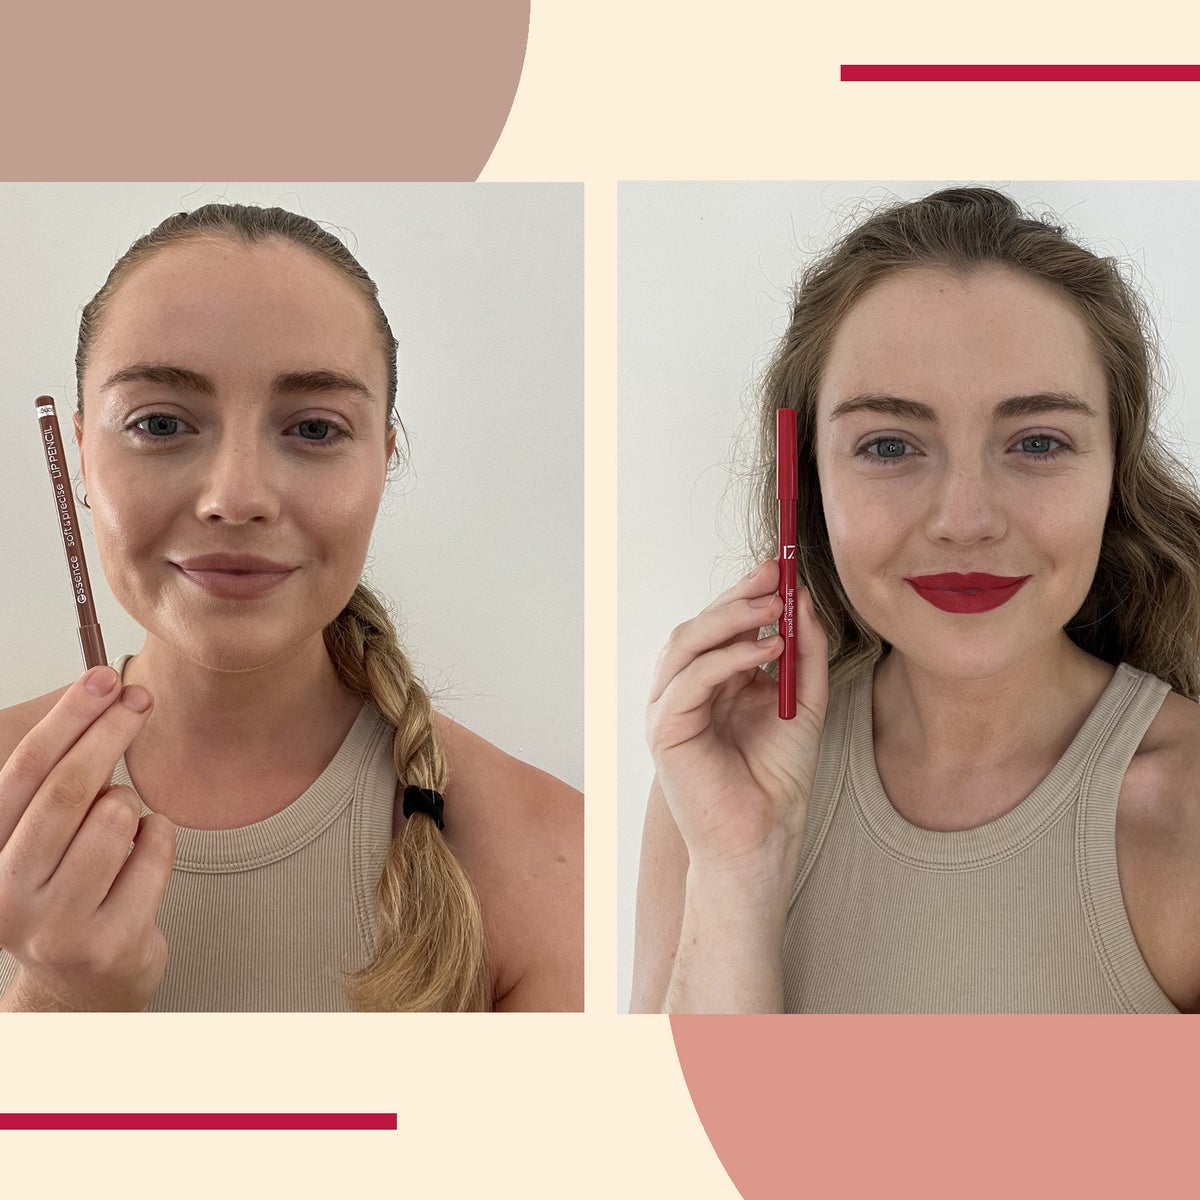 Best lip liners 2022: Pencil and retractable liners for a smudge-free pout